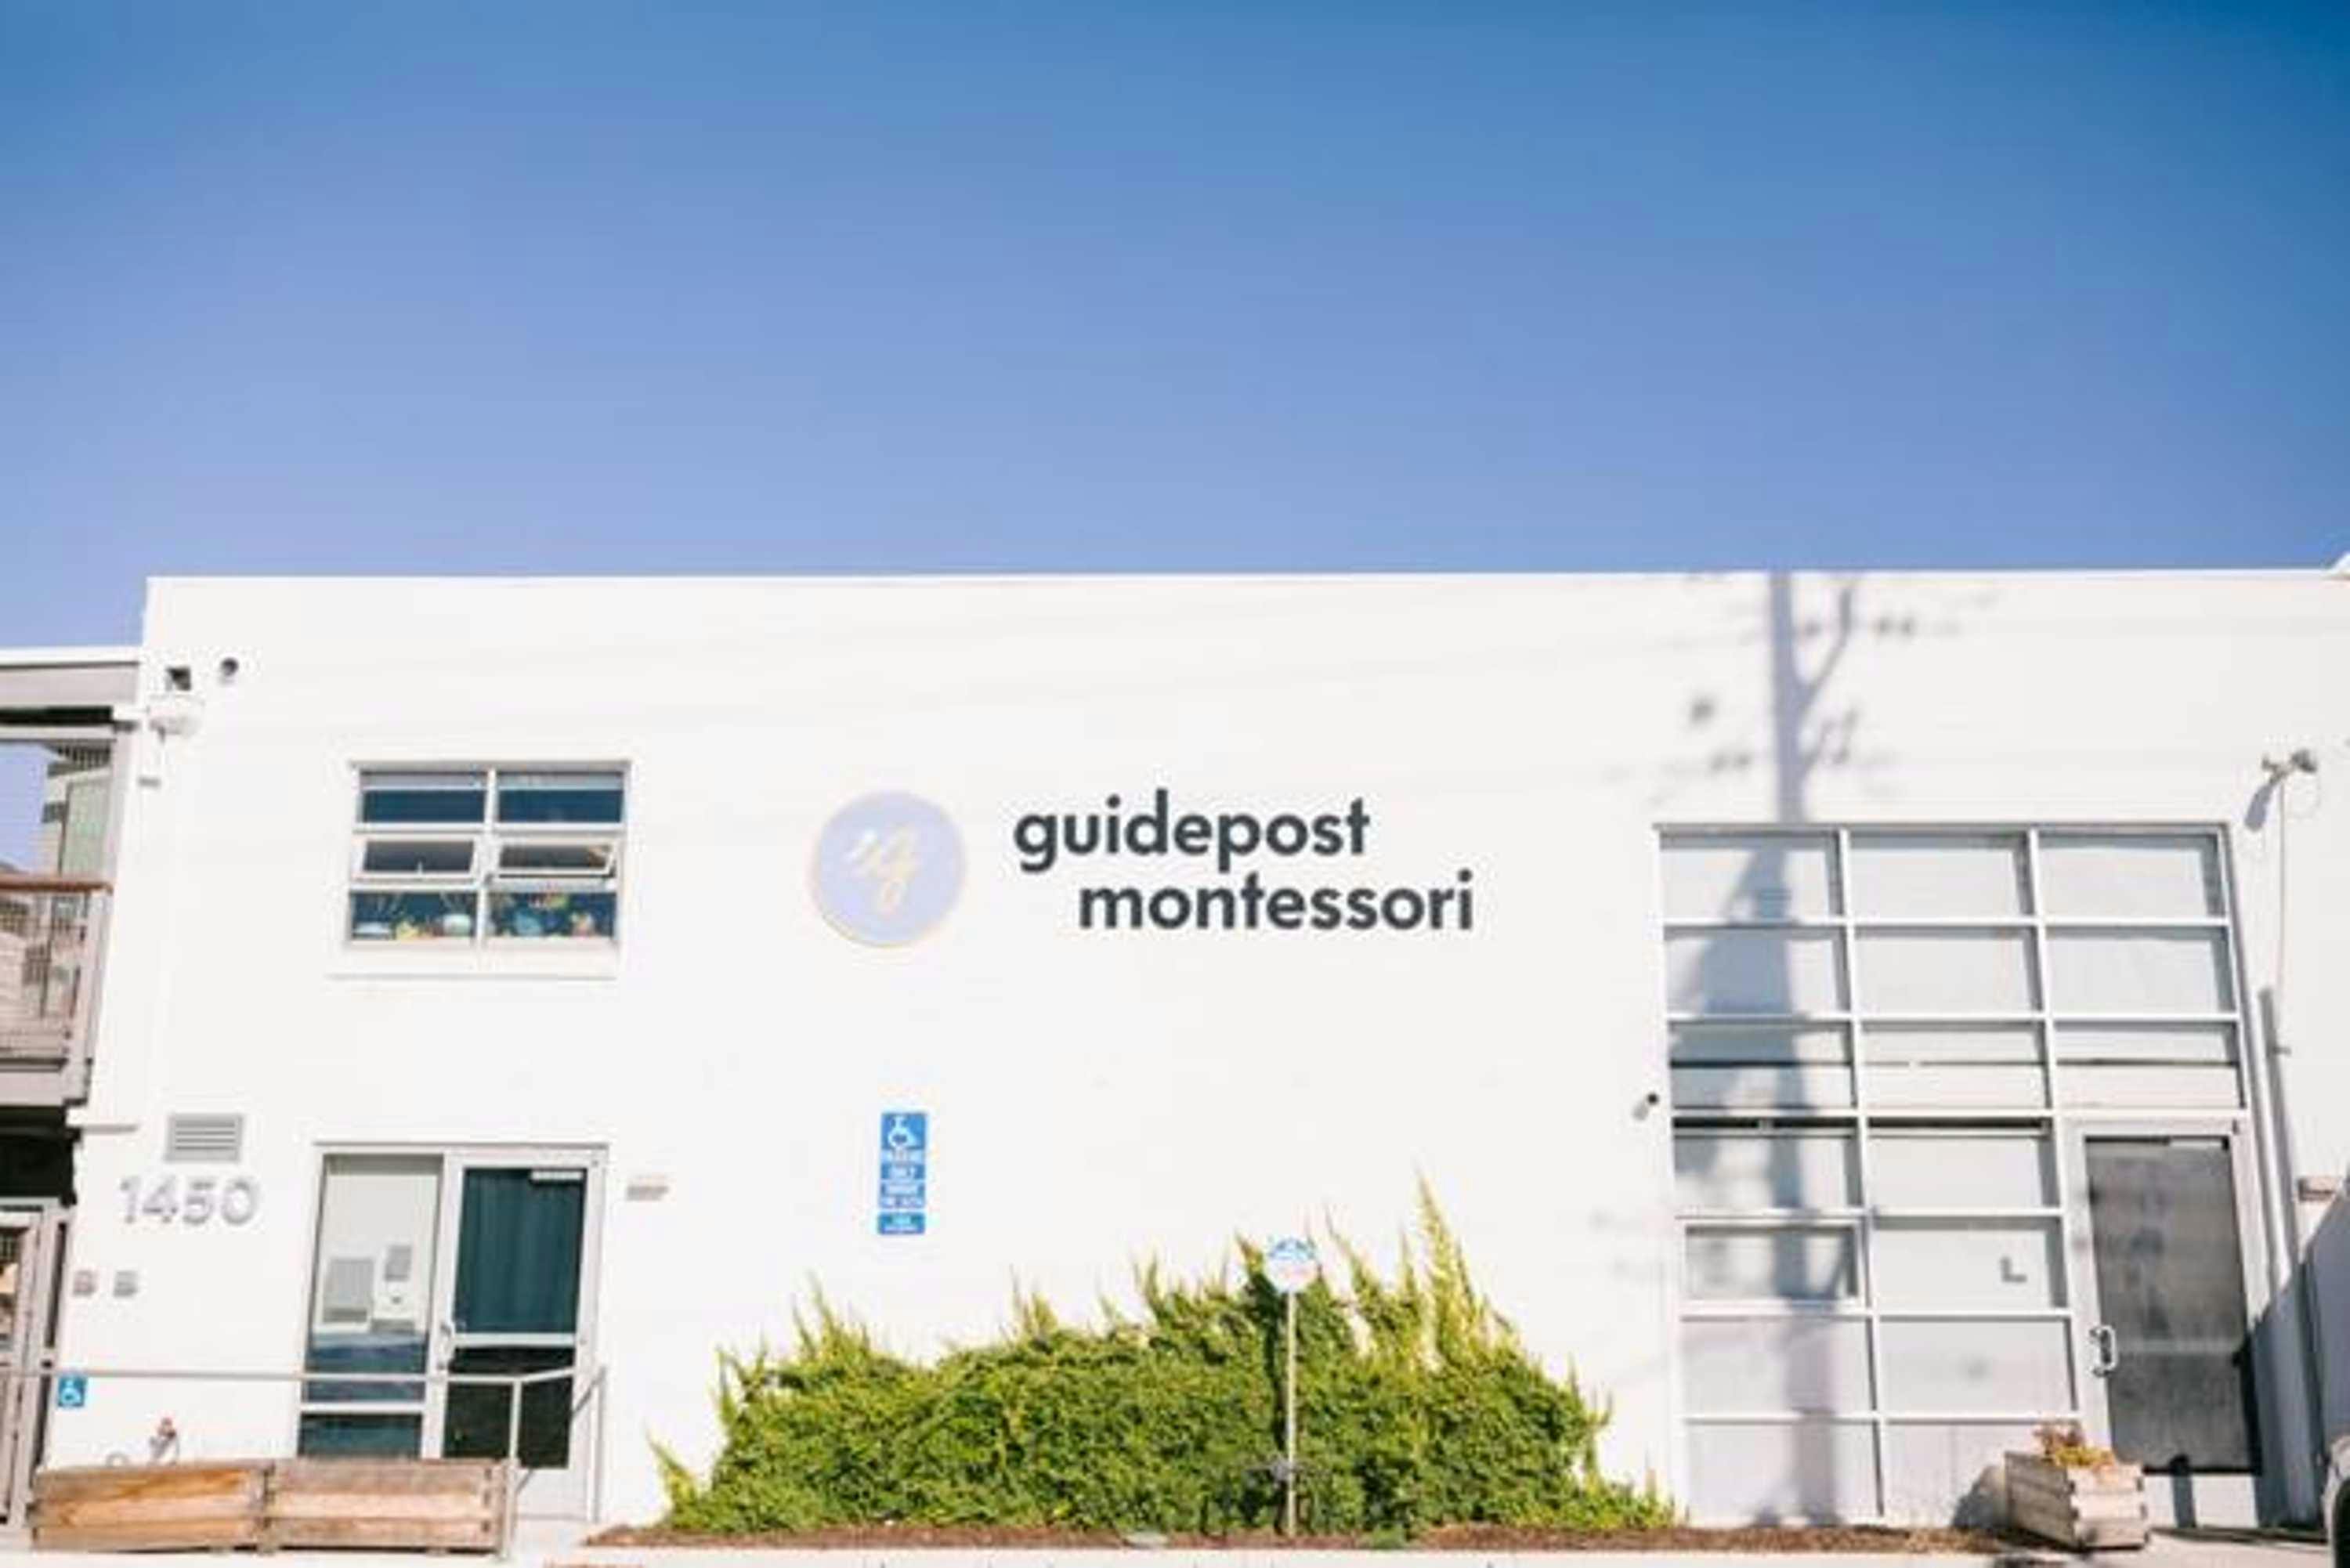 View of Guidepost Montessori at Emeryville facade with a large Guidepost Montessori branded sign which hangs above a bush and a street sign.